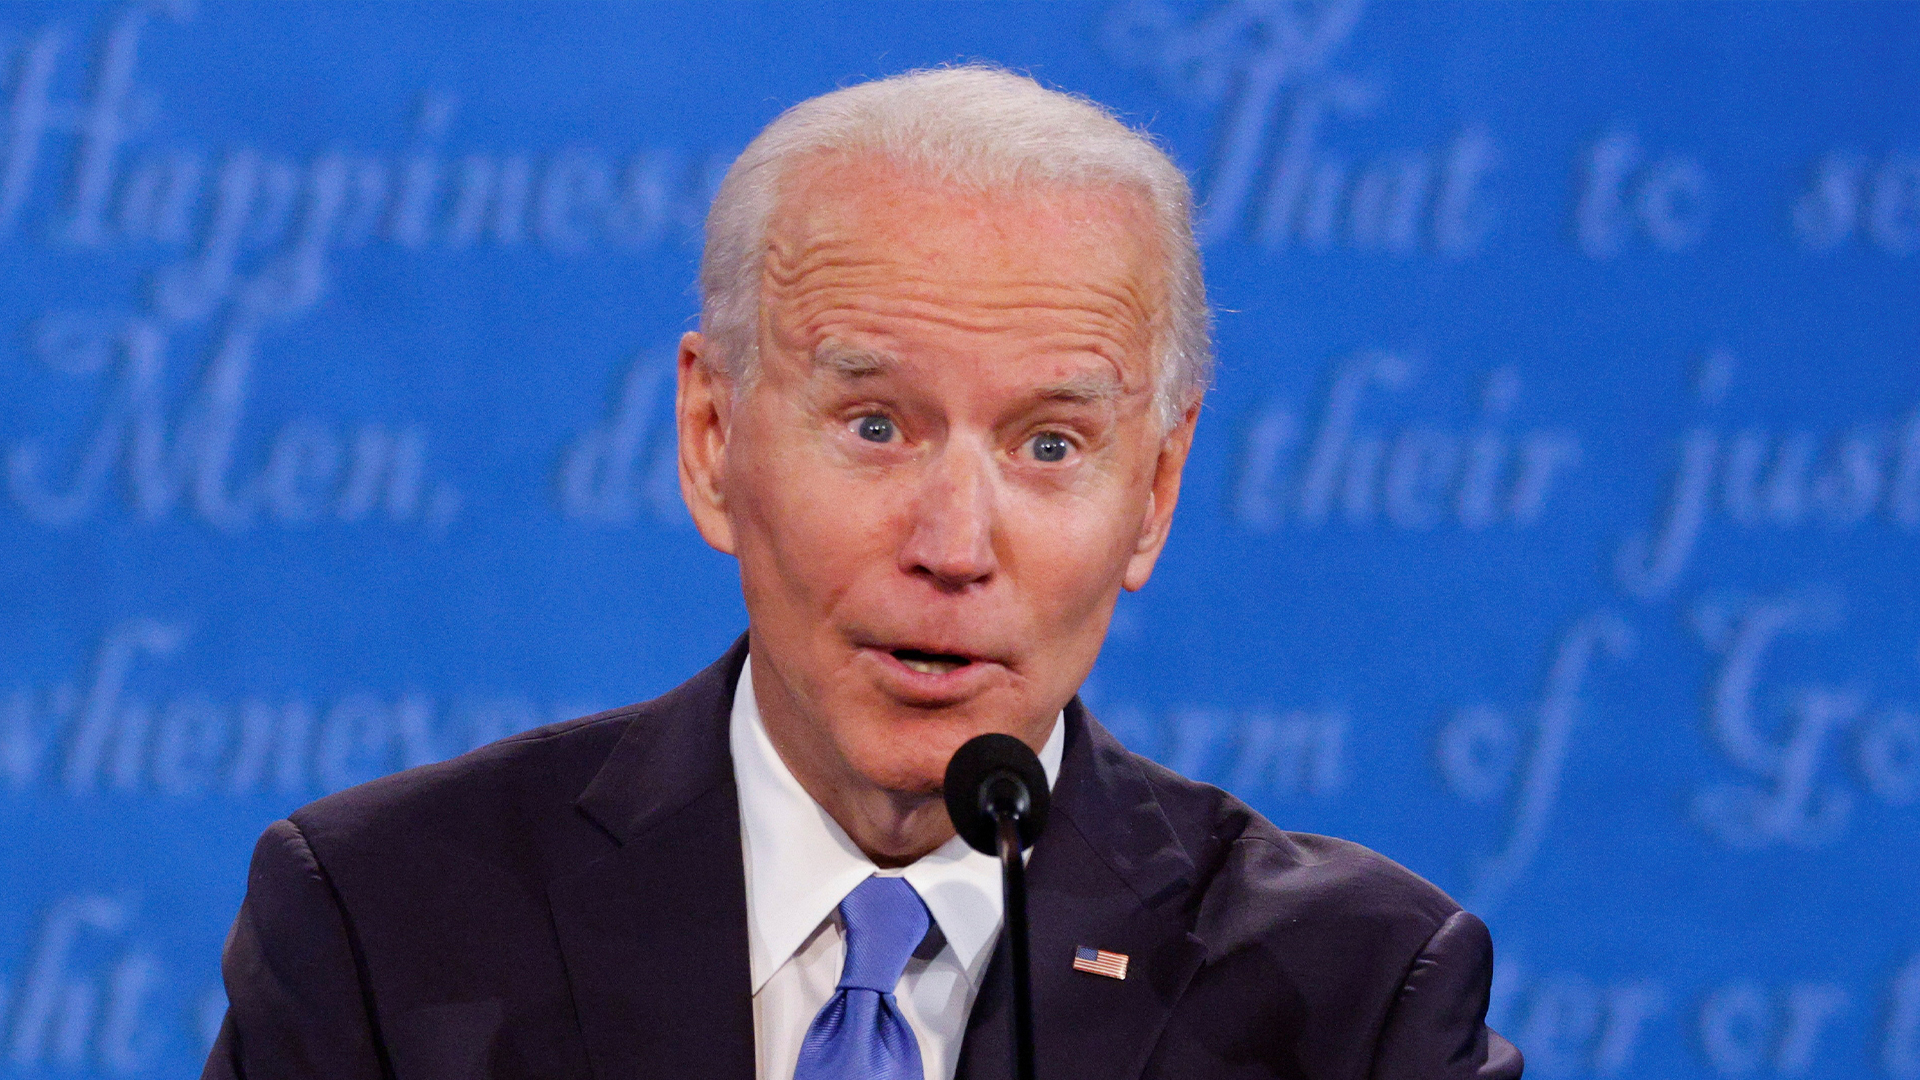 Trump labels Biden the ‘worst debater ever’ as he fires back at president’s demands for showdown & hush money trial jab [Video]